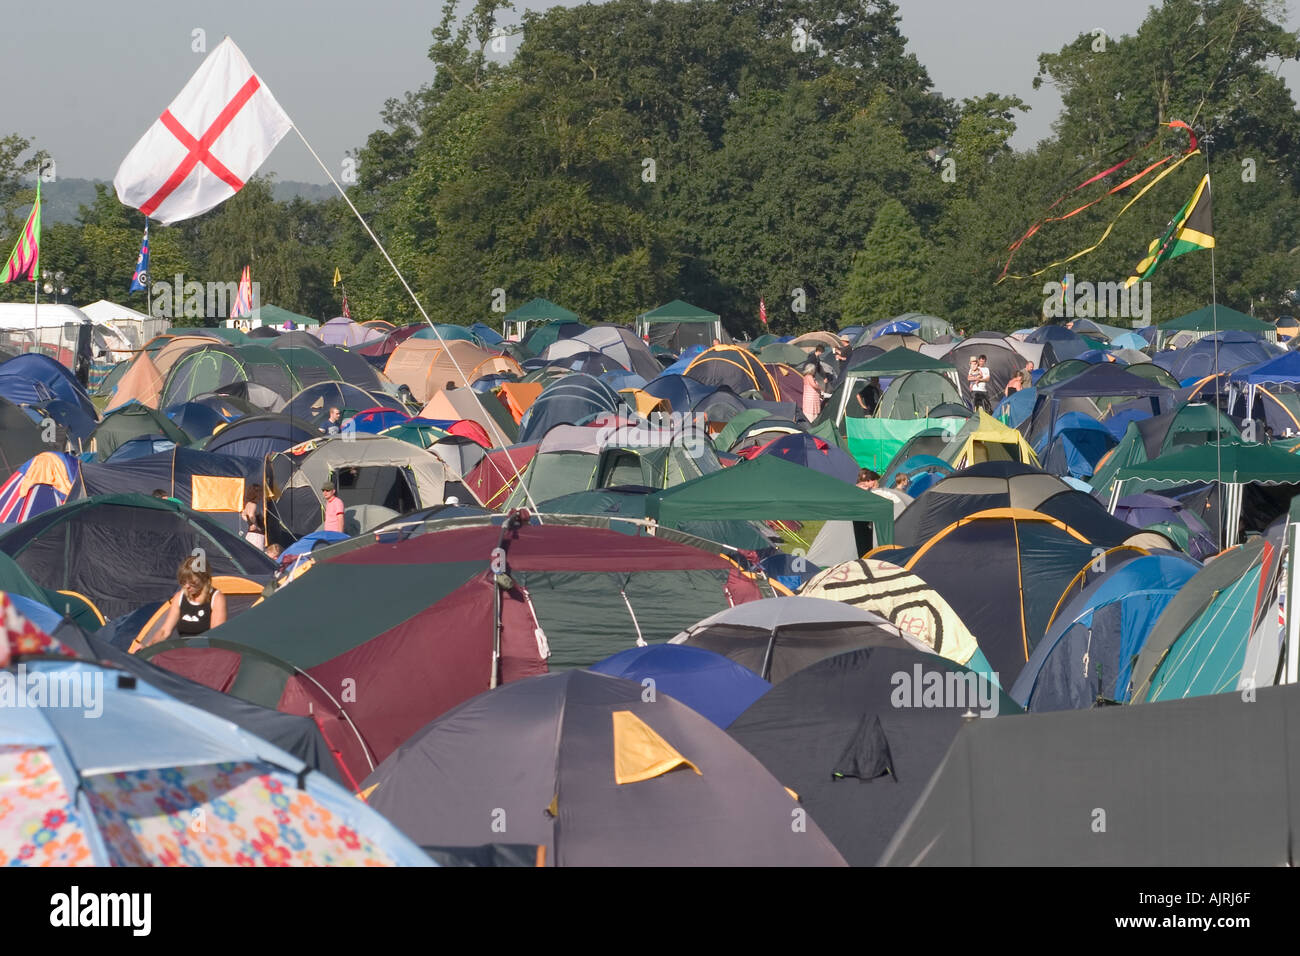 England flag in mass of tents at crowded camp site. Guilfest rock music Festival, Guildford, England Stock Photo